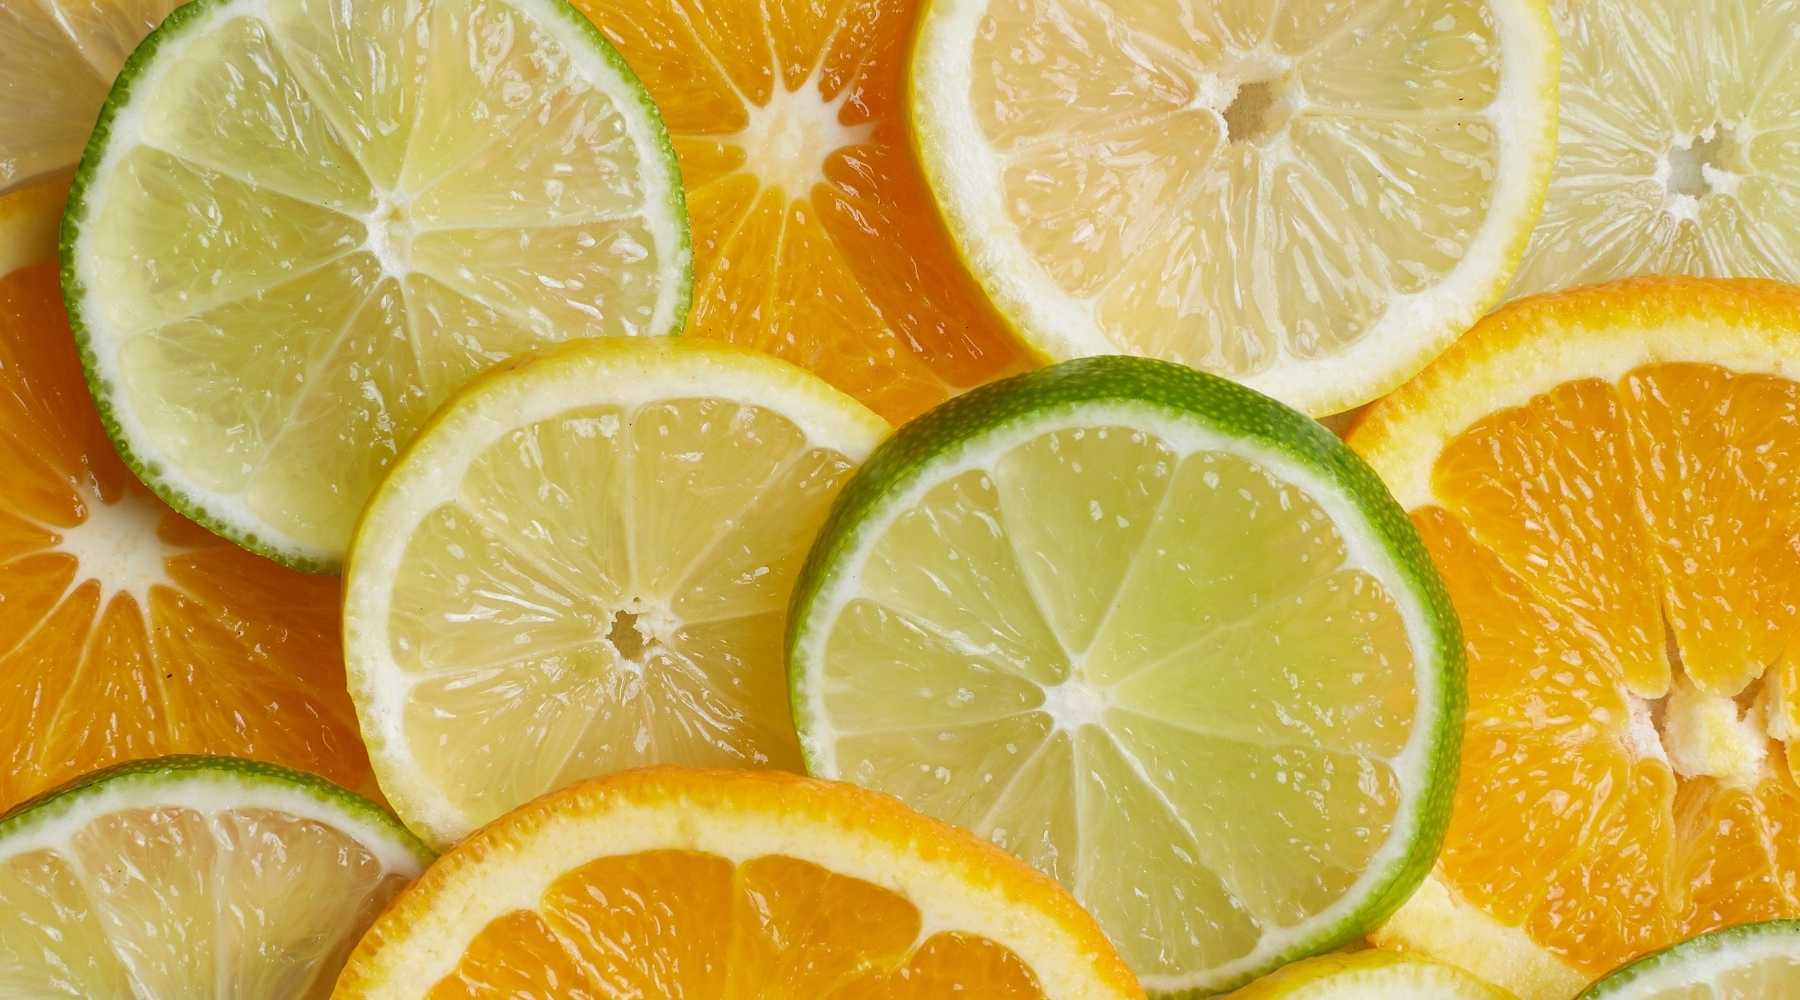 What Makes Citrus So Healthy? Hint: It’s More than Just Vitamin C!